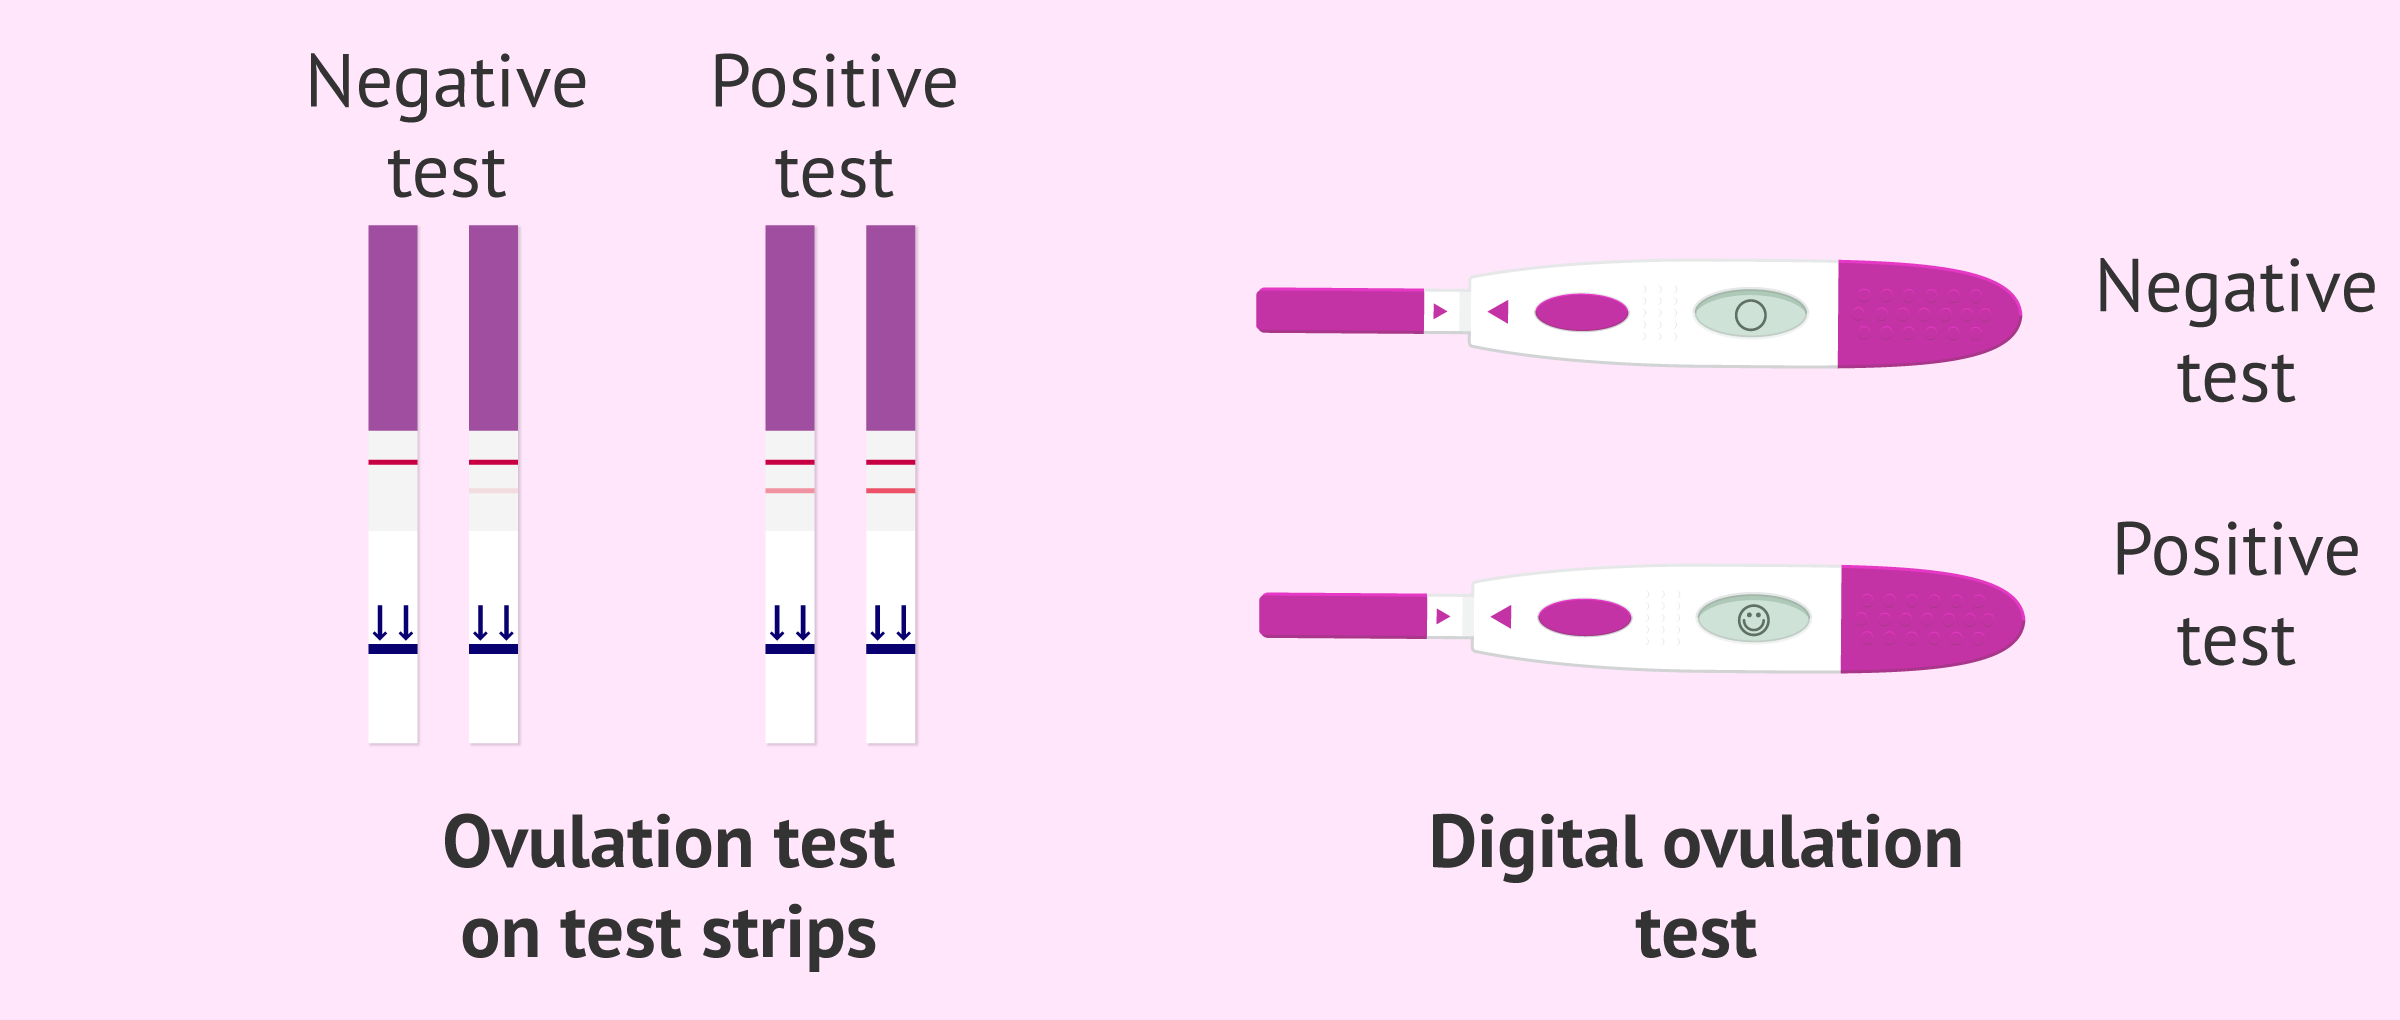 Types of ovulation tests